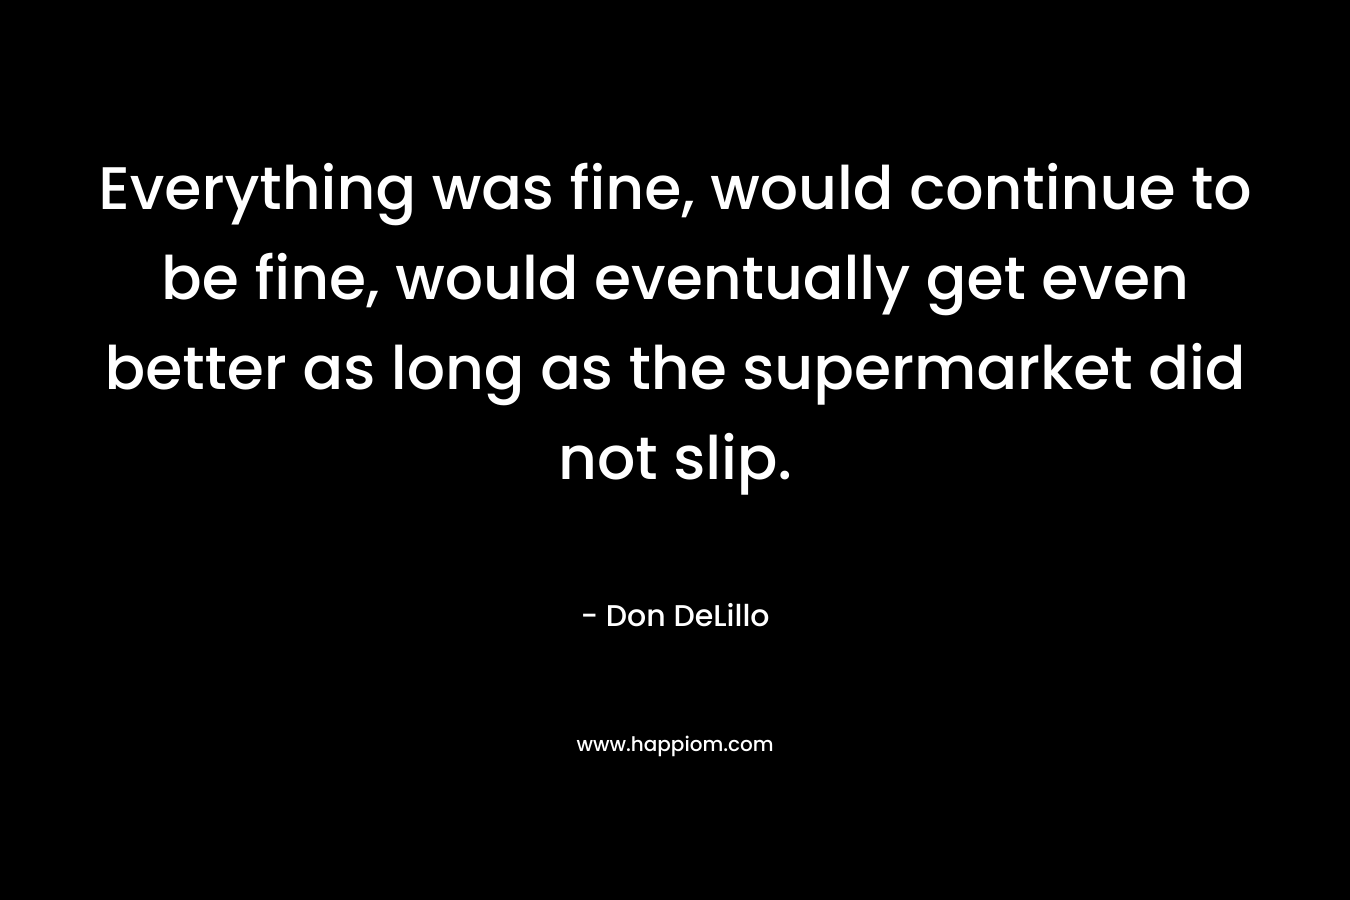 Everything was fine, would continue to be fine, would eventually get even better as long as the supermarket did not slip. – Don DeLillo